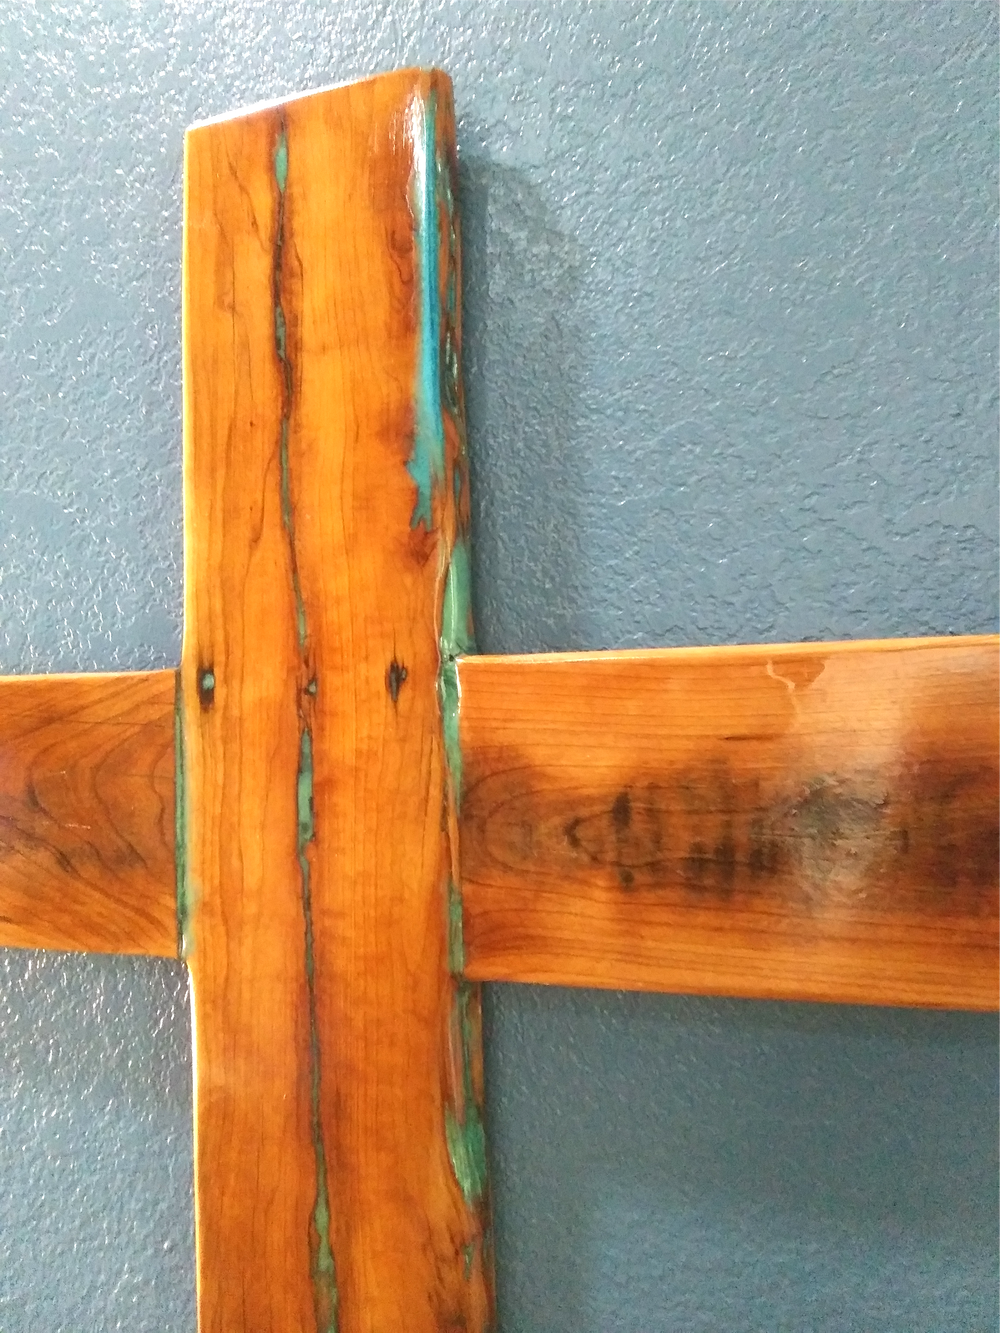 Irvins Tinware: 16.5-Inch Large Reclaimed Wooden Cross